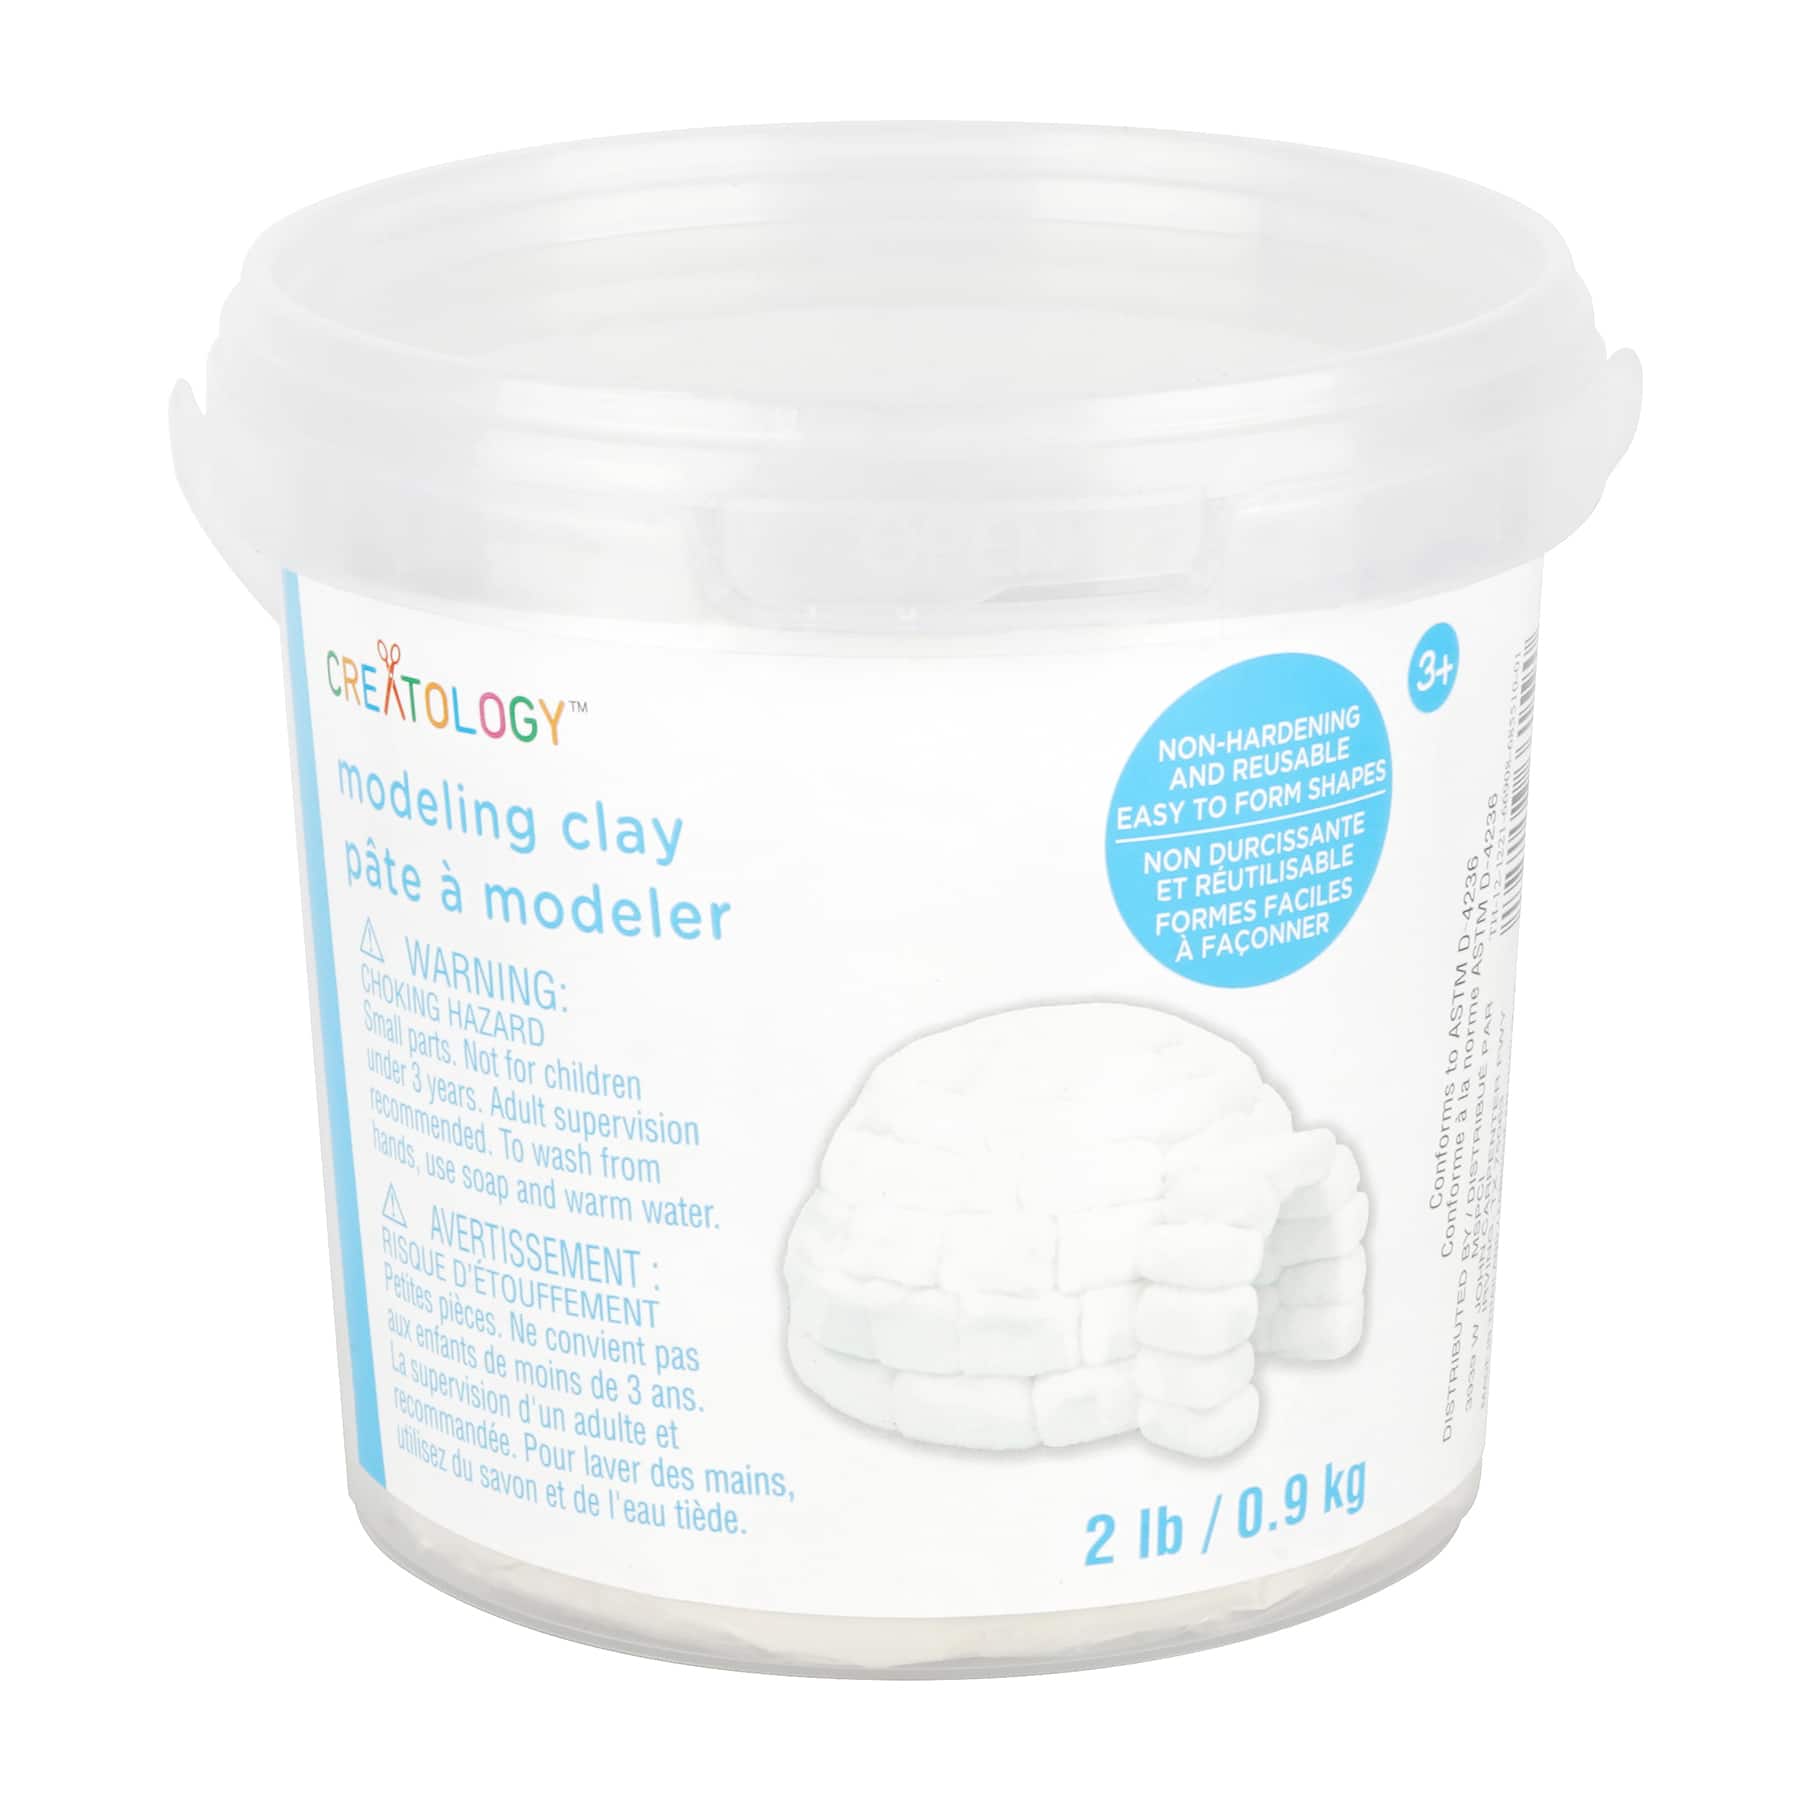  Glorex 0 0904 – Paperclay Modelling Clay, 450 g, White : Arts,  Crafts & Sewing